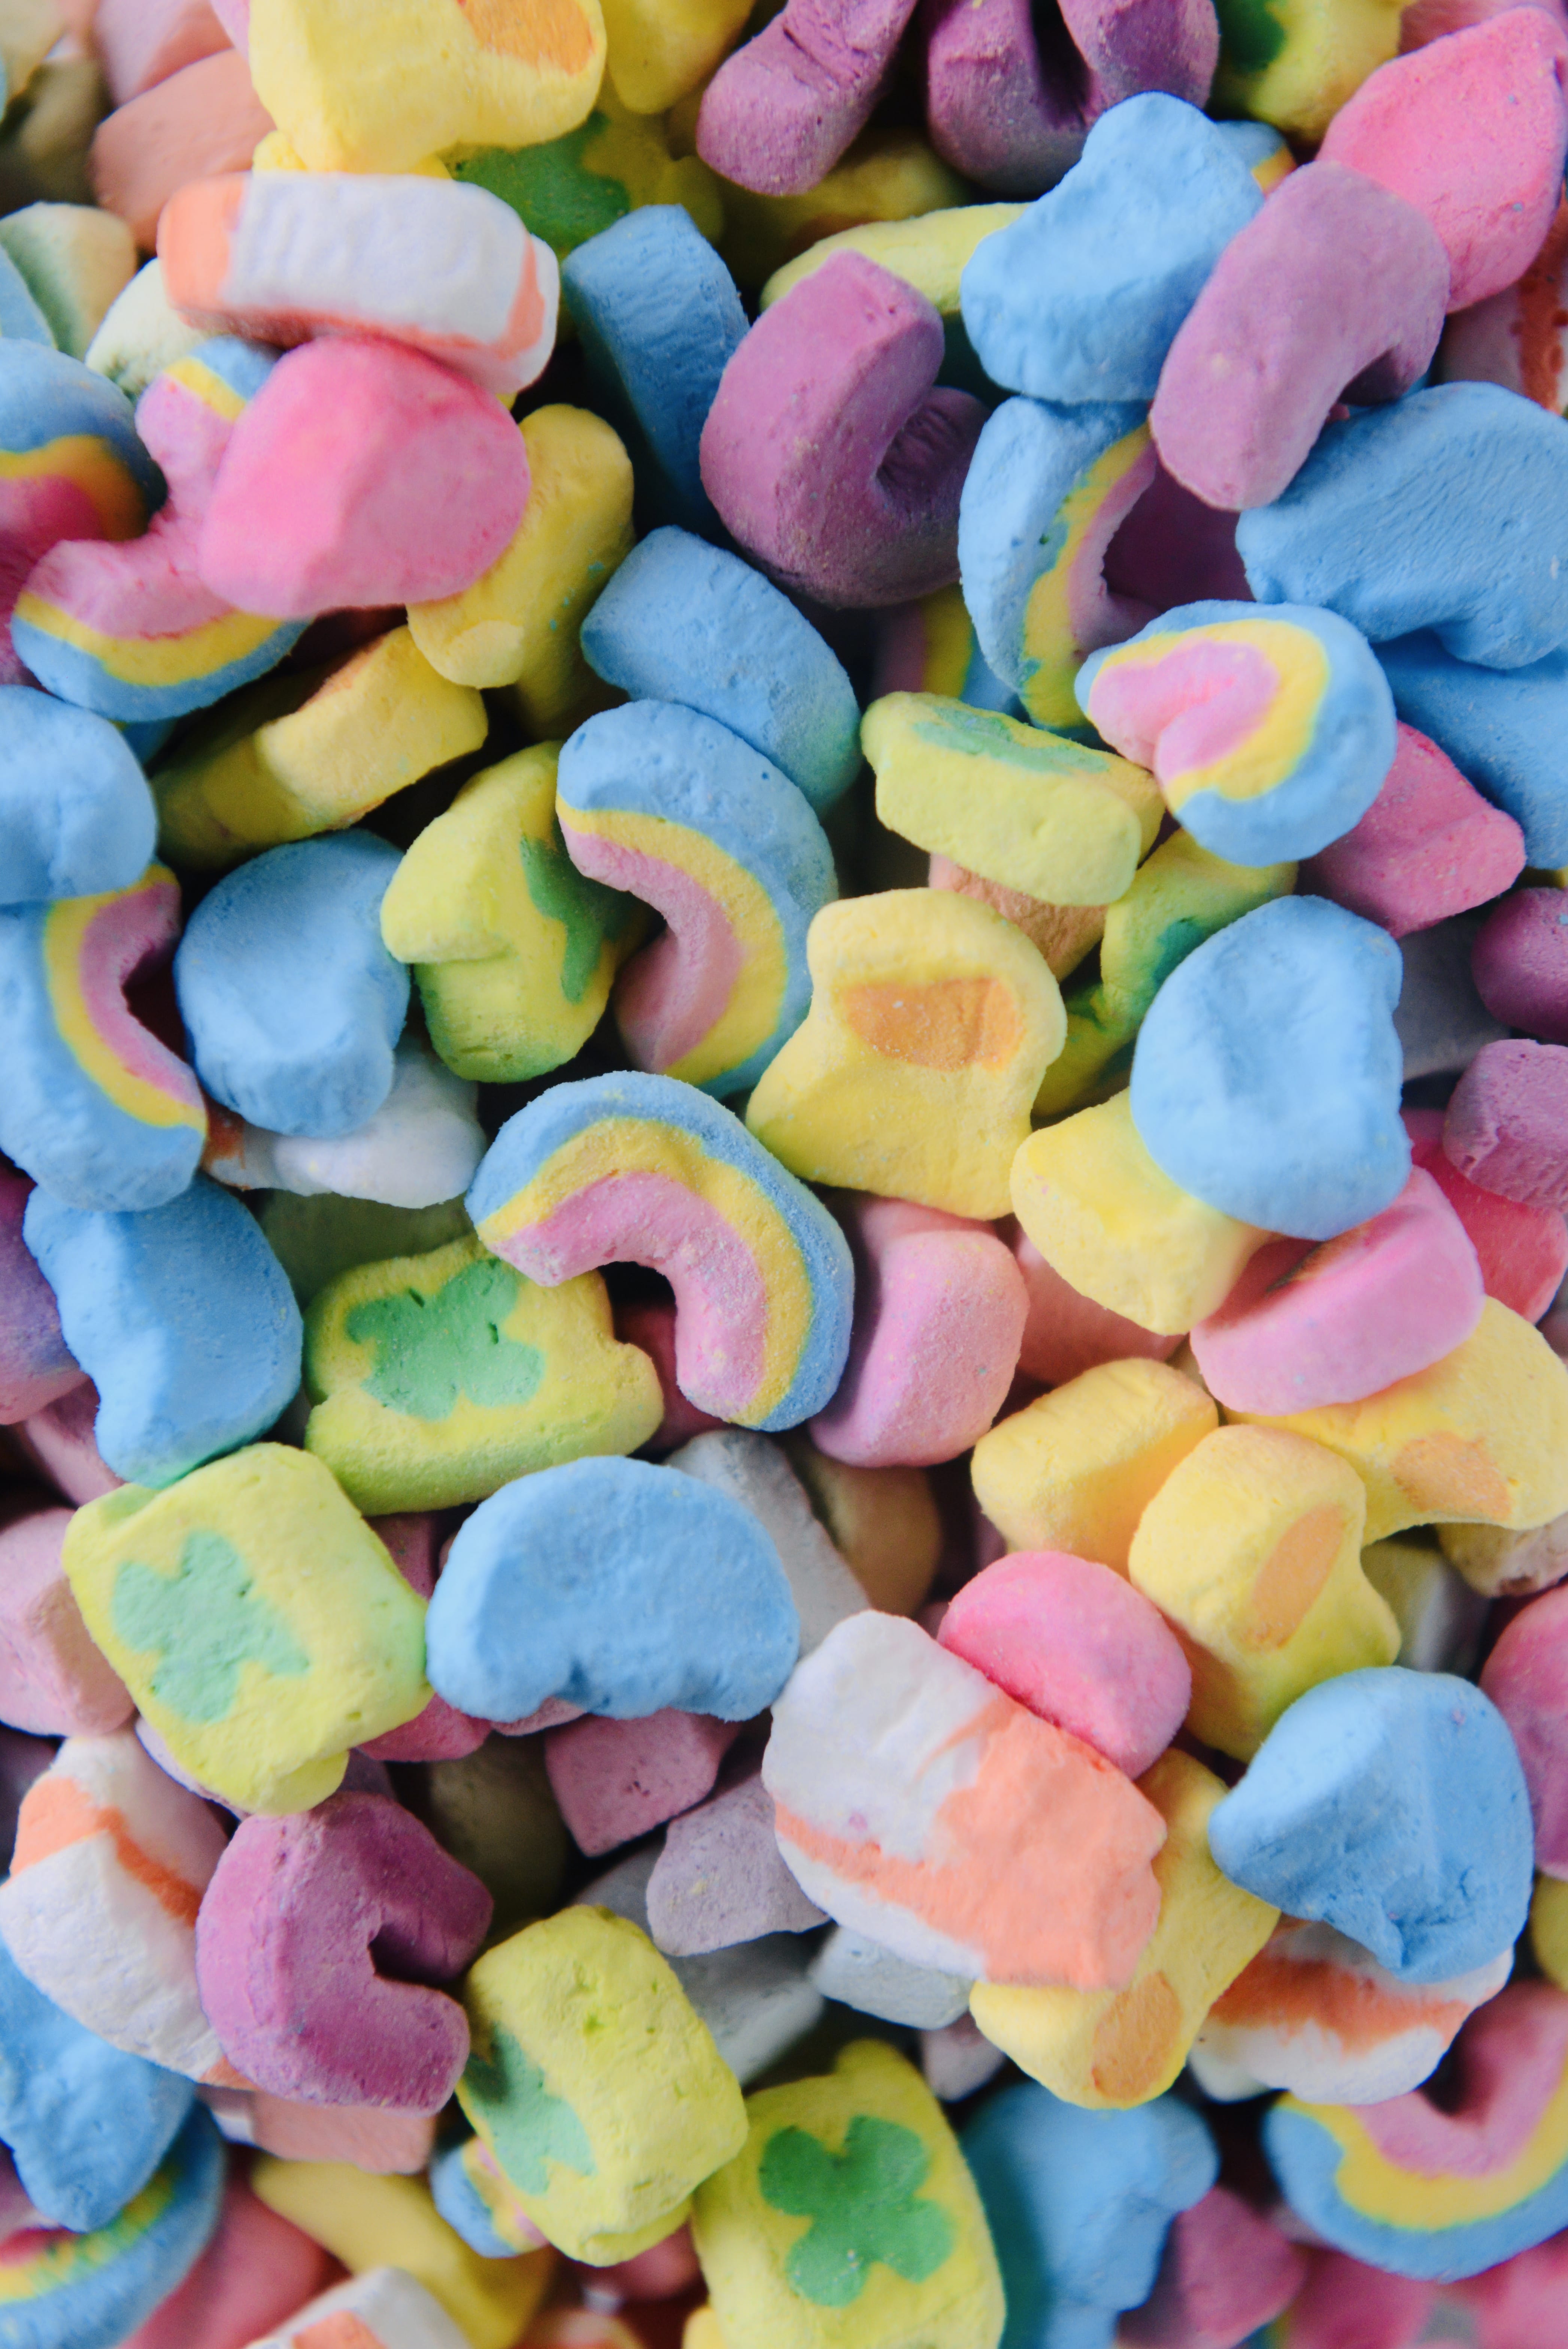 A close up of a pile of colorful cereal marshmallows. - Marshmallows